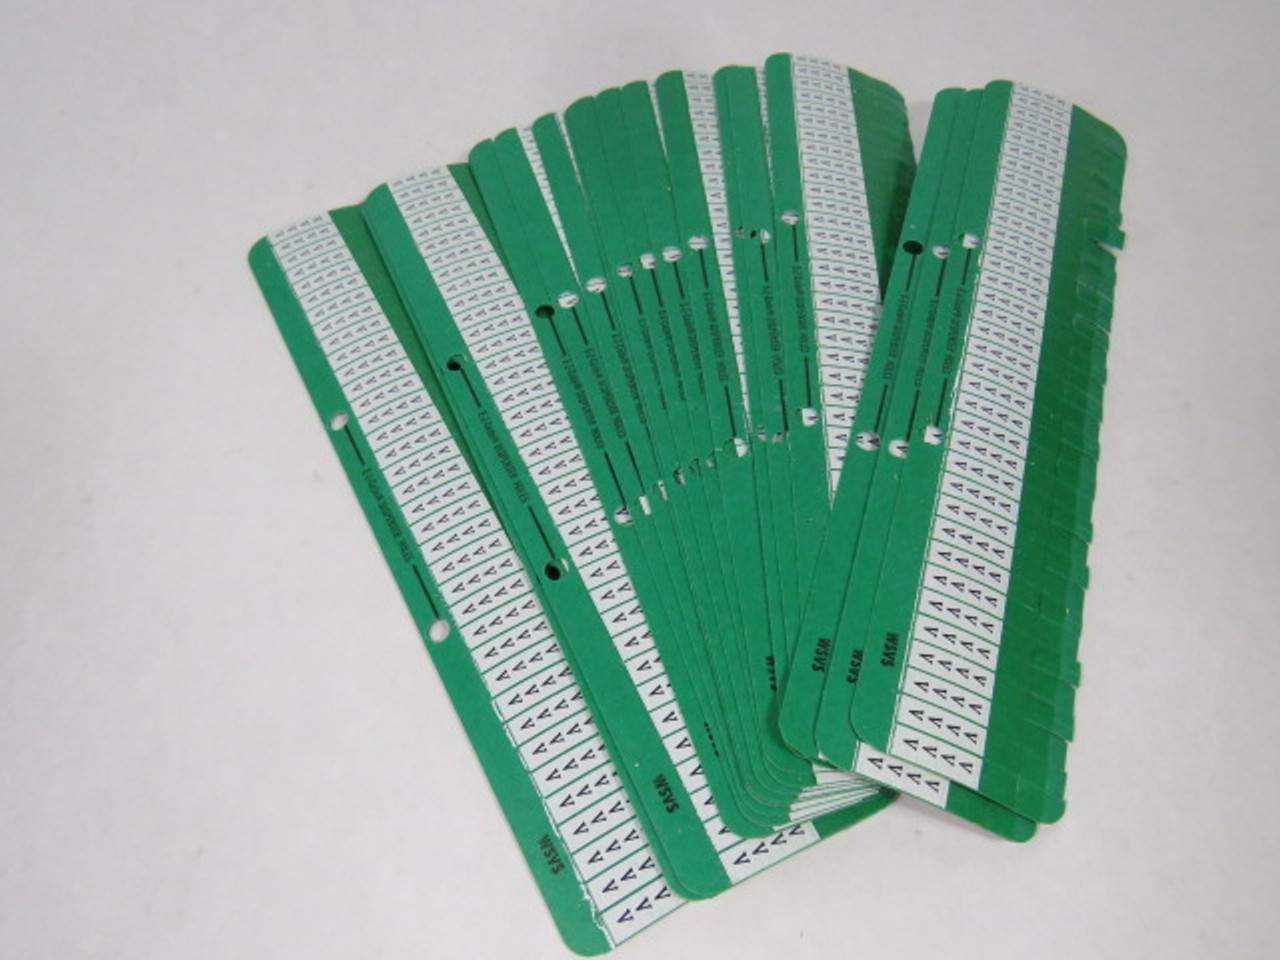 Thomas & Betts V Green E-Z-Code Wire Markers 25-Pack ! NEW !